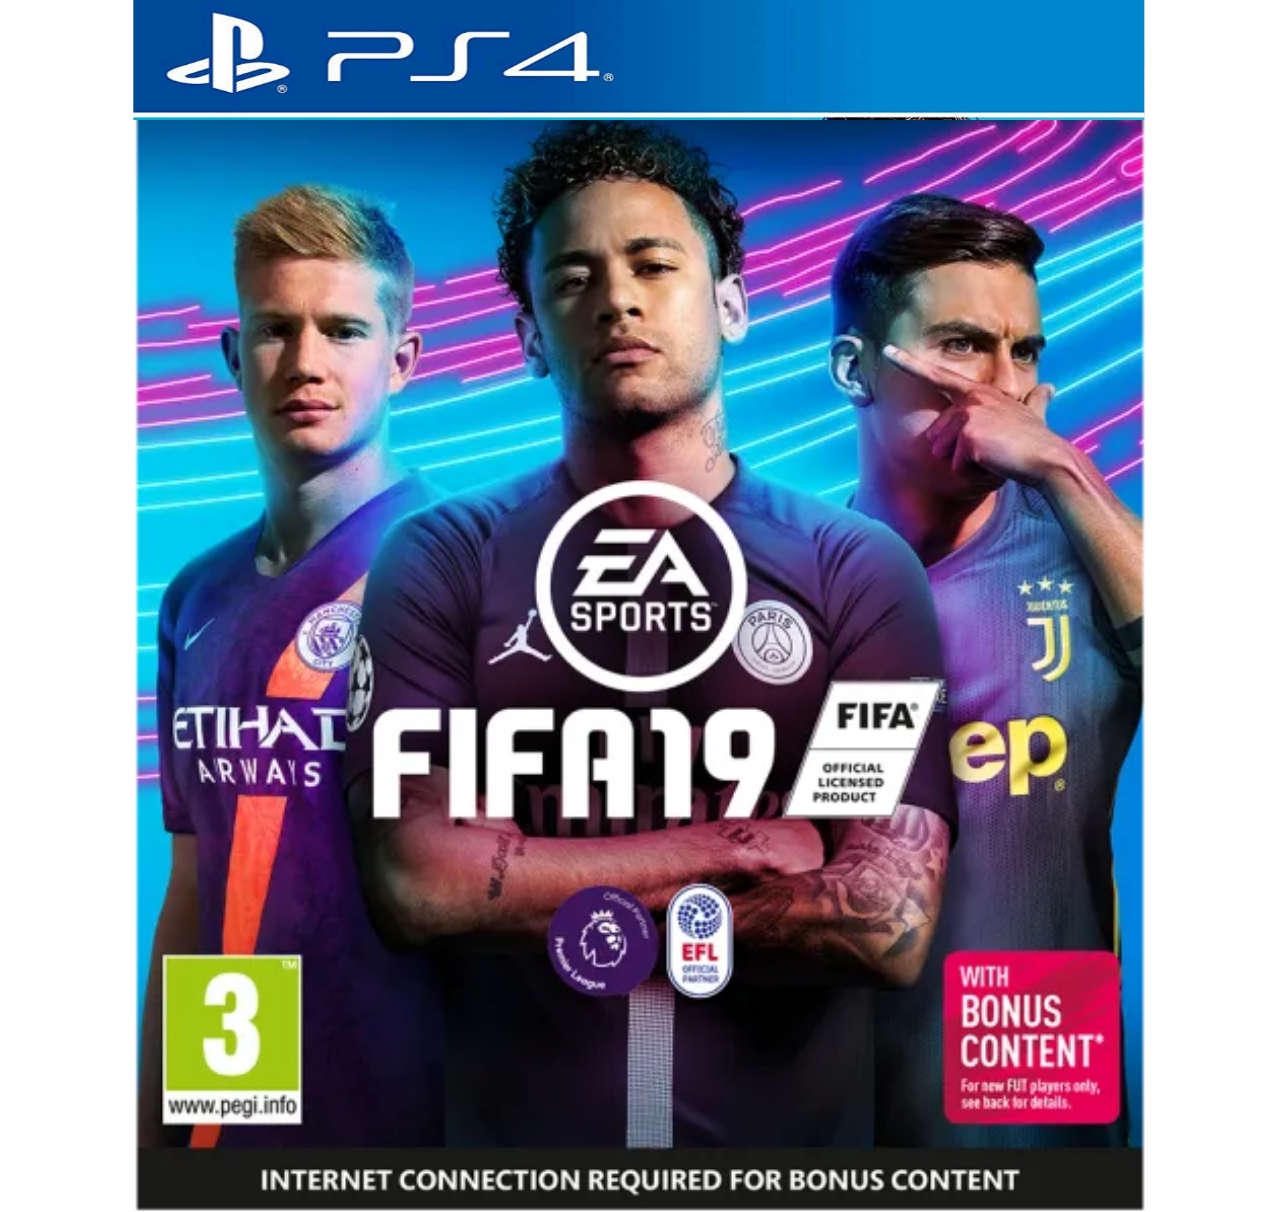 Erudipedia: Fifa 19 Gets New Updated Cover For All Platforms1280 x 1212